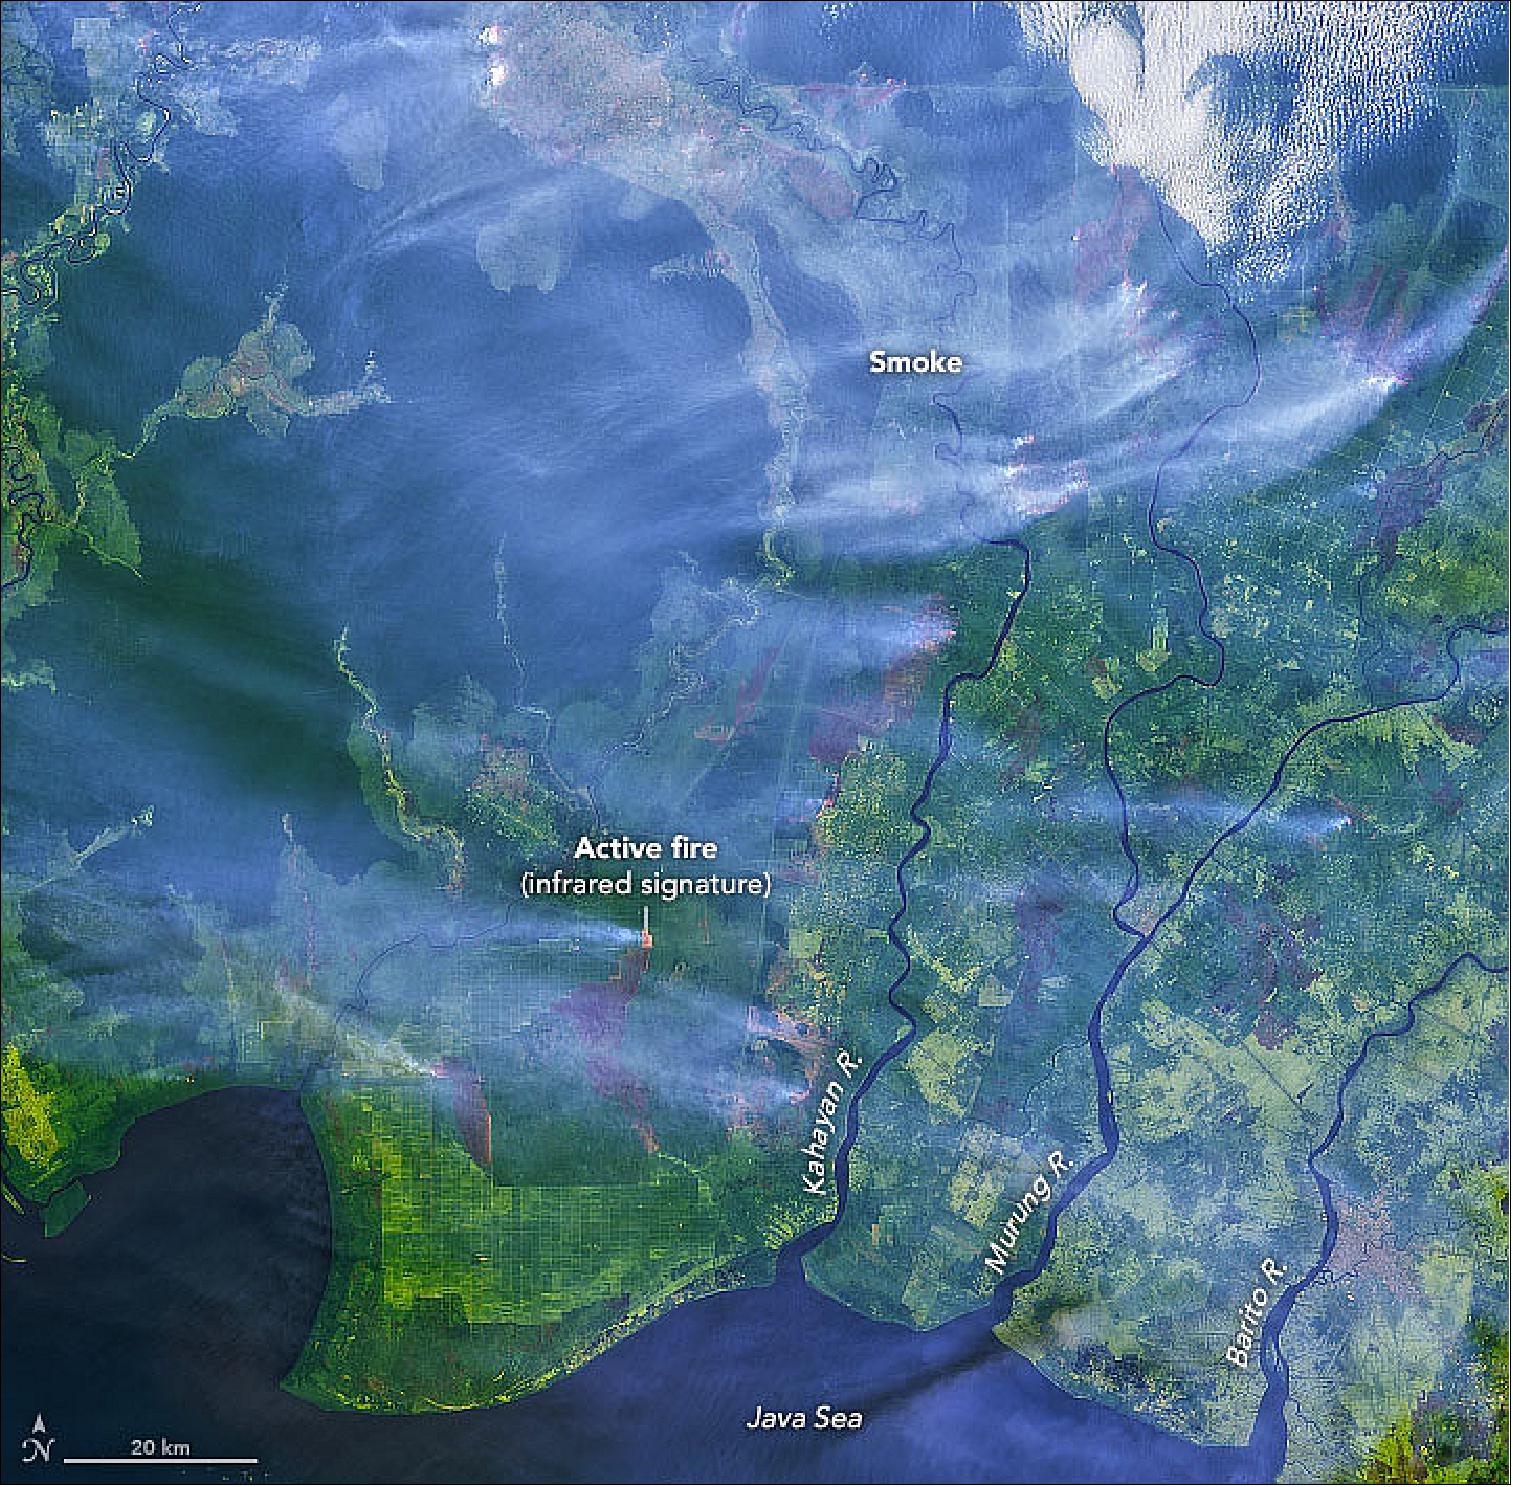 Figure 18: The Operational Land Imager (OLI) on Landsat-8 acquired this image, which shows fires burning in several oil palm areas in southern Borneo. Shortwave-infrared observations have been overlain on a natural-color image to highlight the locations of active fires (image credit: NASA Earth Observatory, image by Joshua Stevens, using Landsat data from the U.S. Geological Survey. Story by Adam Voiland)